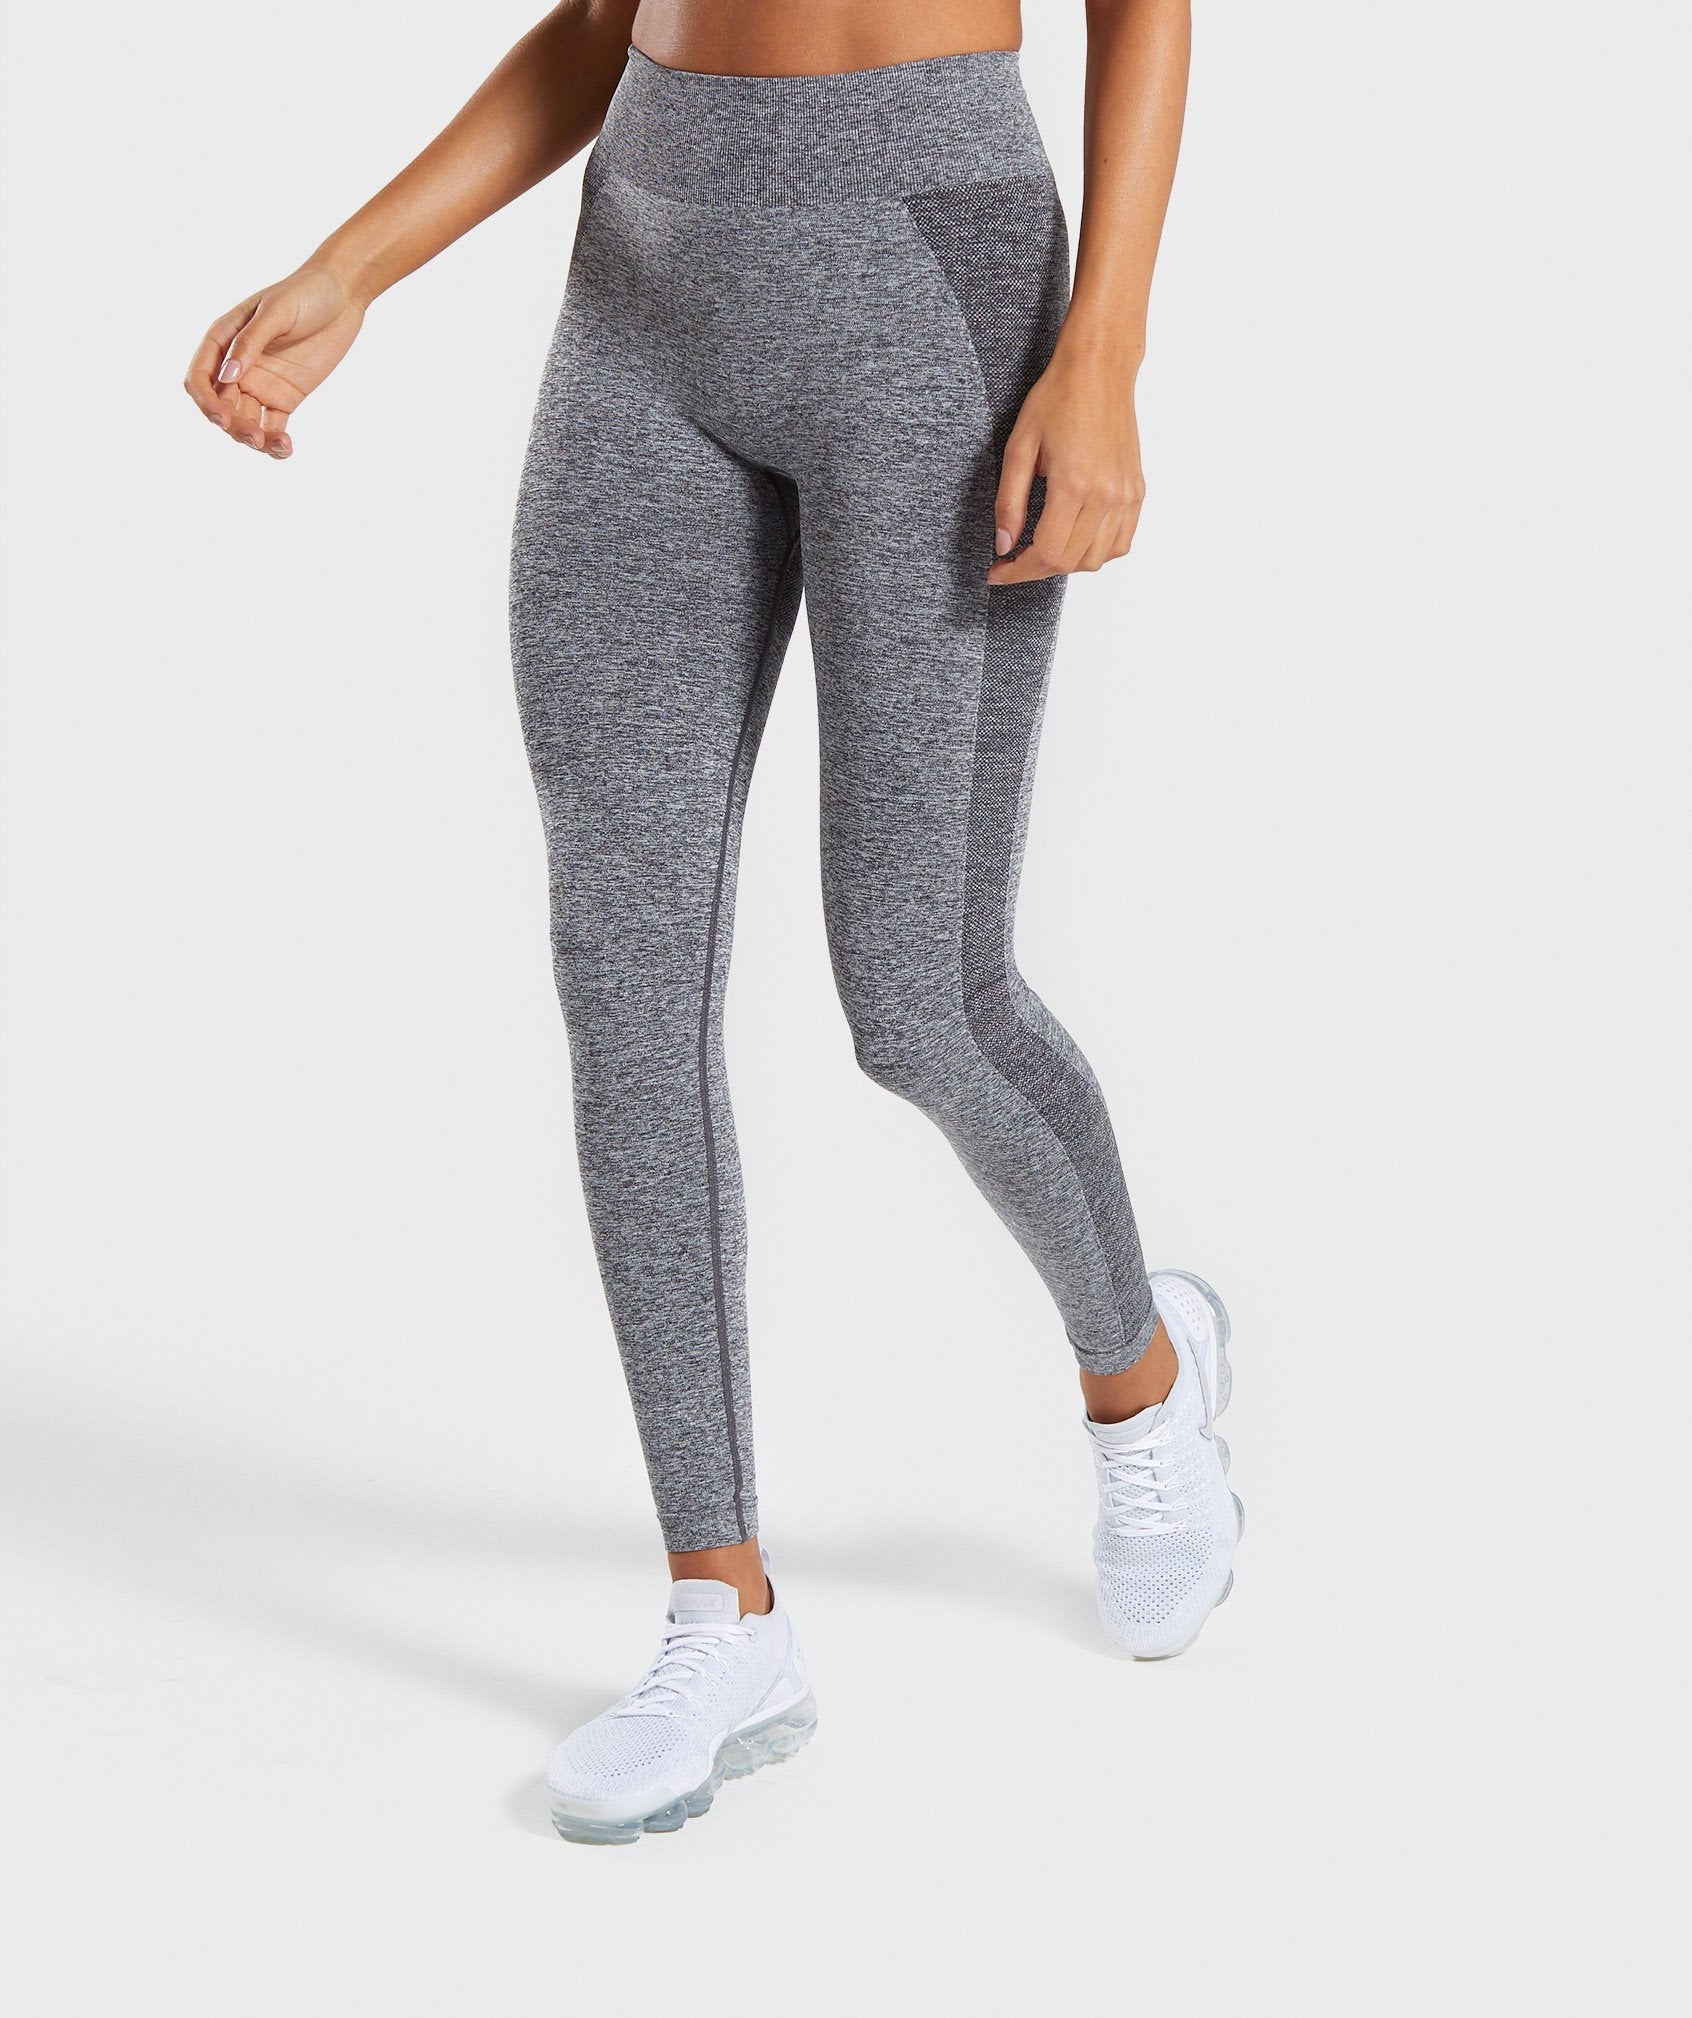 Flex High Waisted Leggings in Grey/Pink - view 2